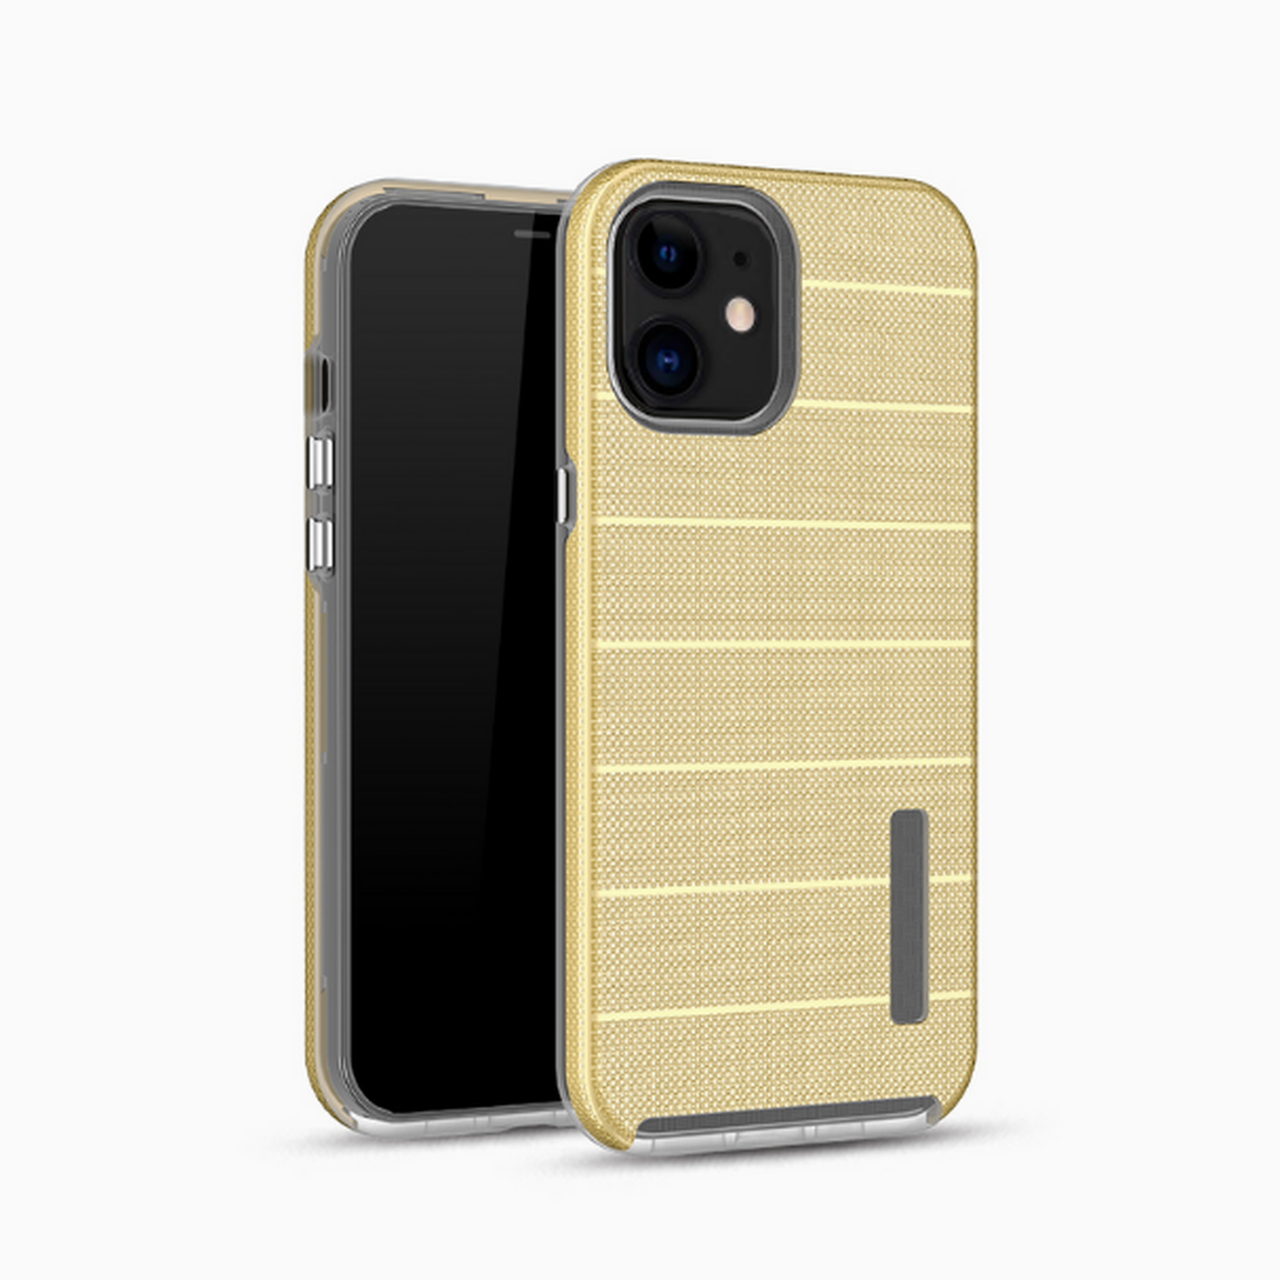 Caseology Hard Shell Fashion Case for iPhone 12 Pro